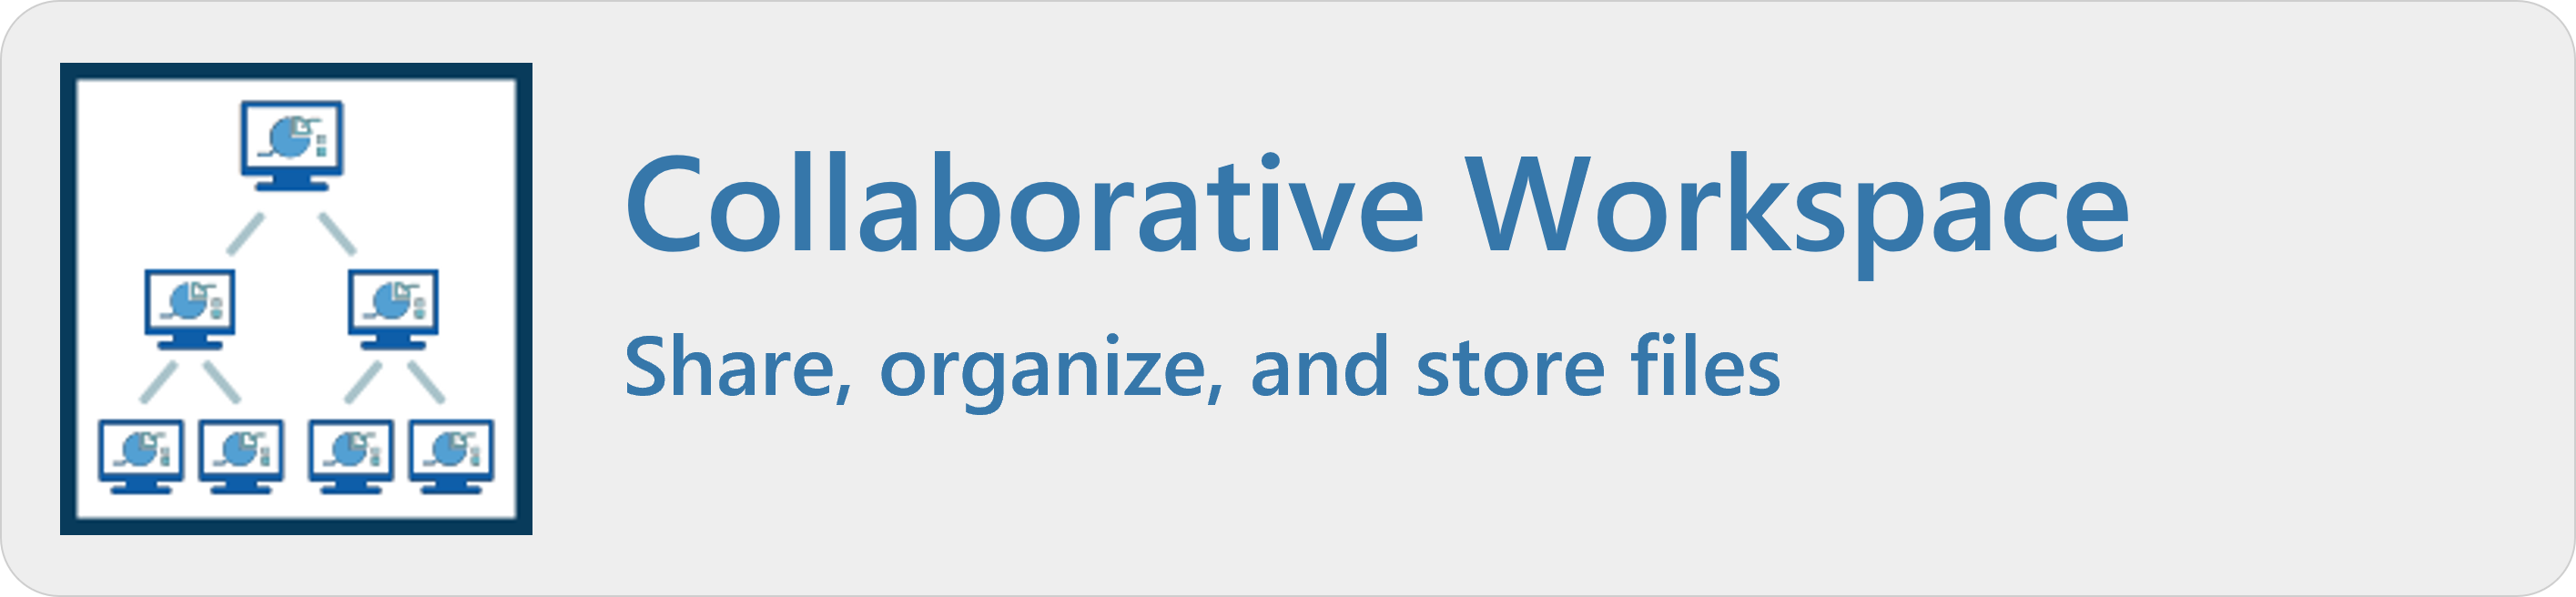 Collaborative Workspace - Share, organize, and store files